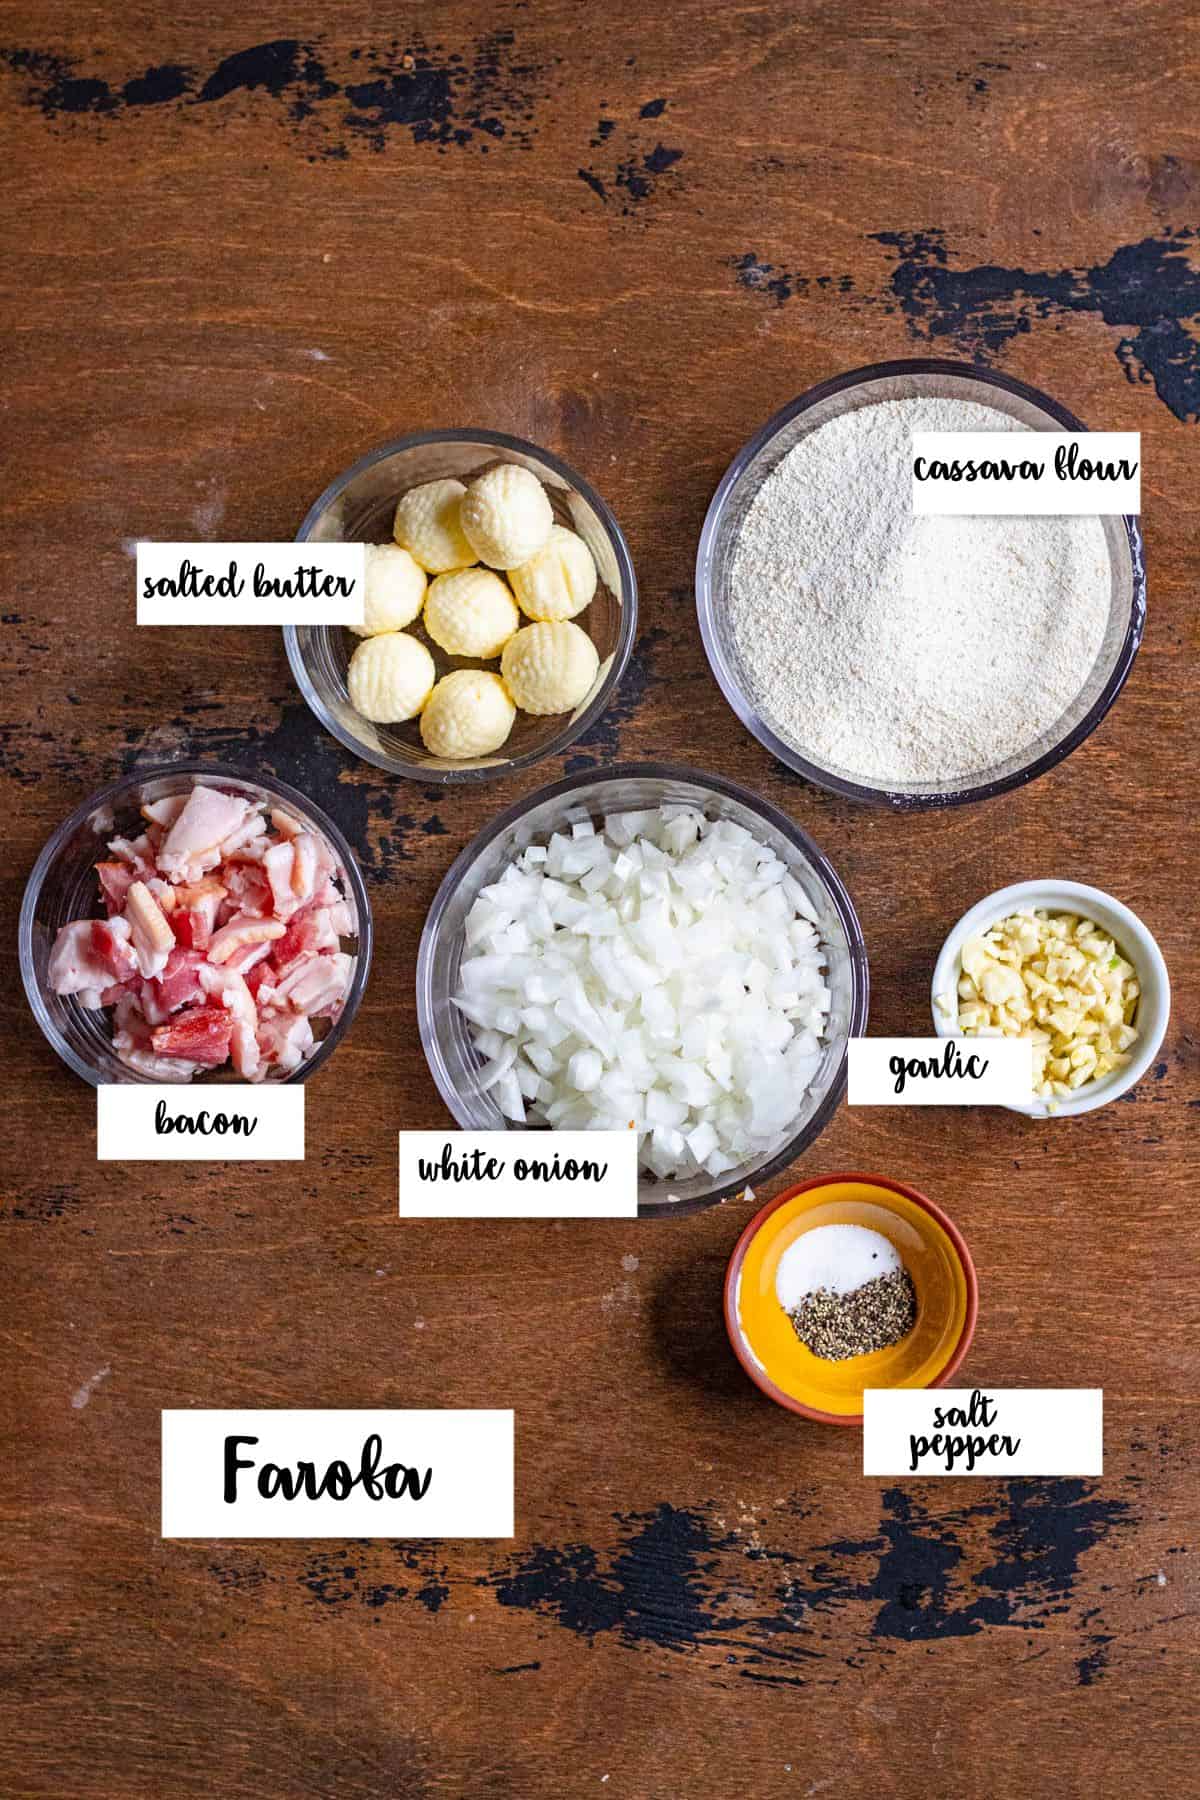 Ingredients shown are used to prepare farofa. 